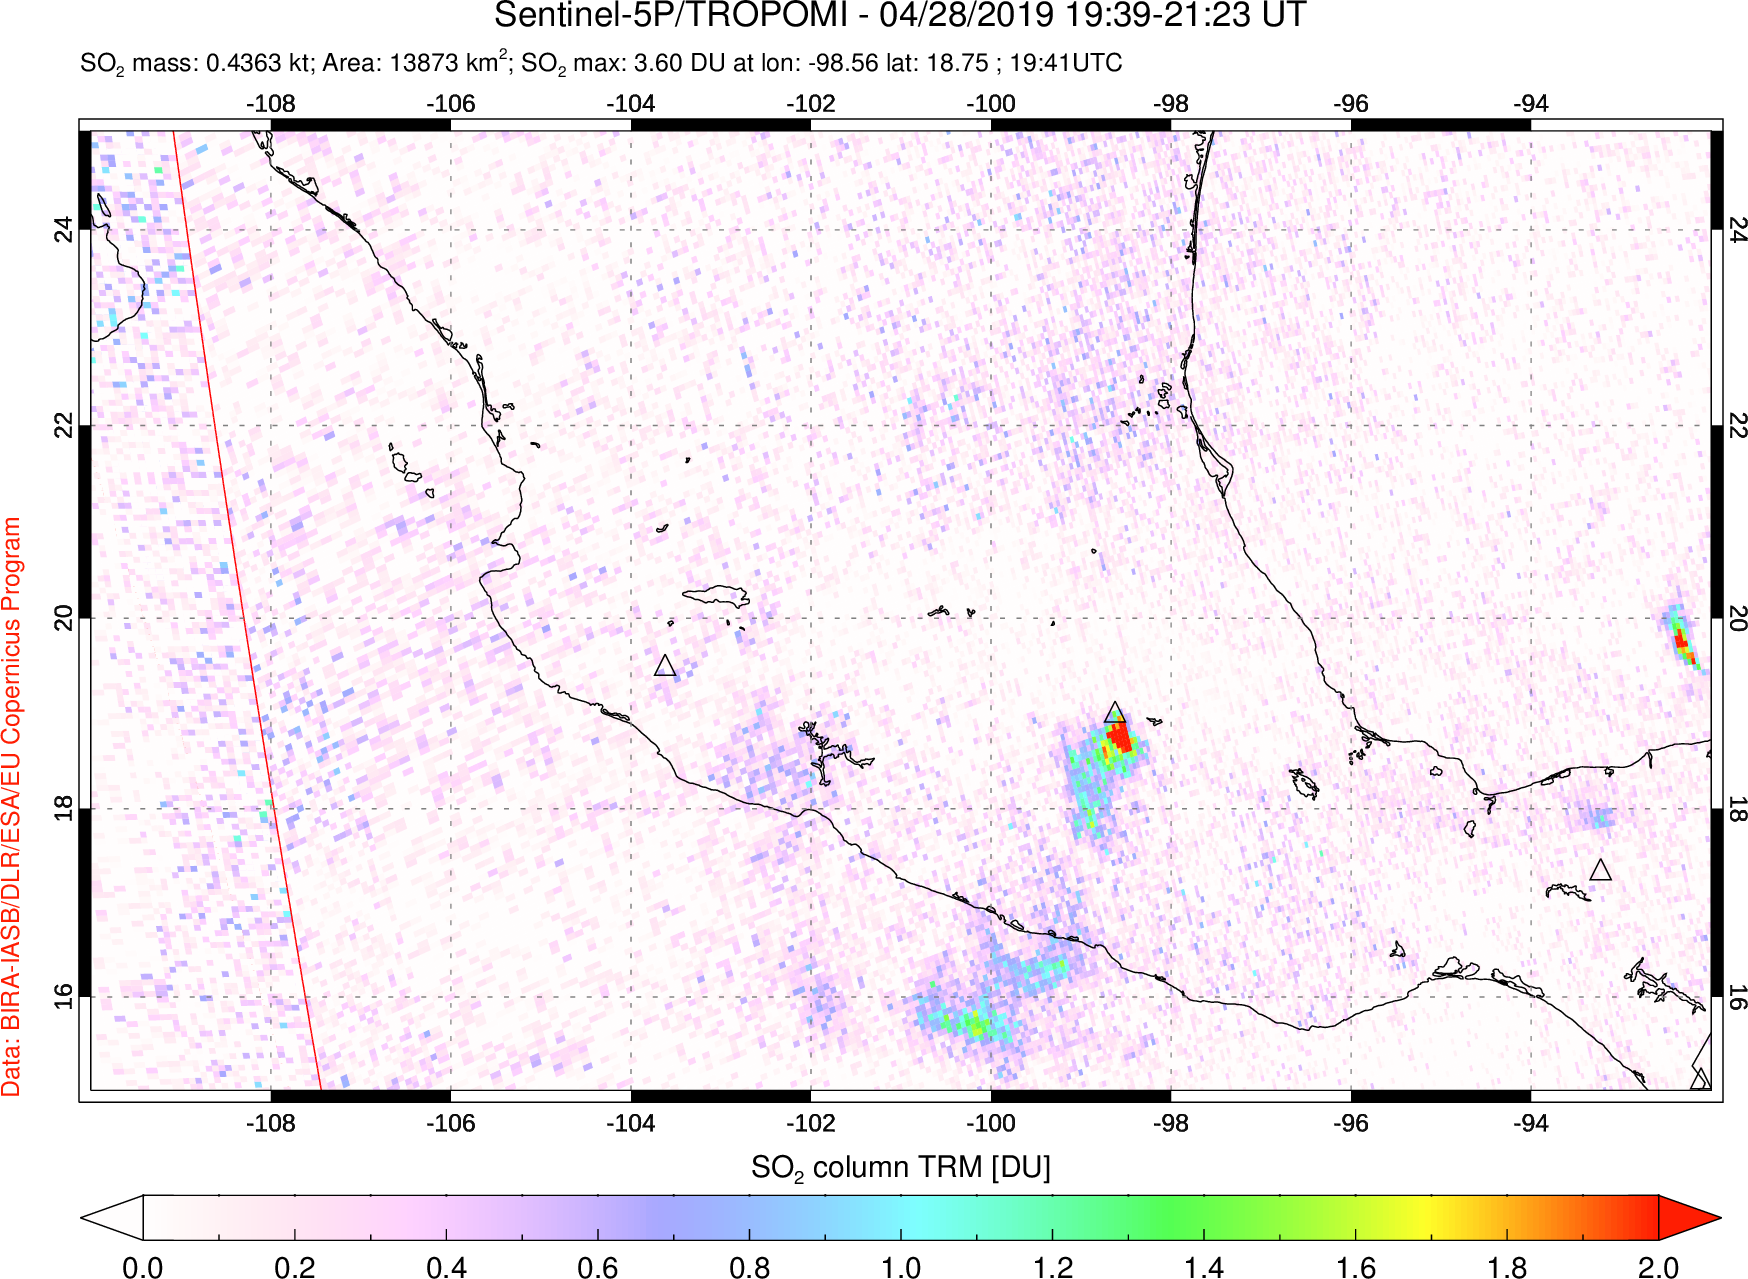 A sulfur dioxide image over Mexico on Apr 28, 2019.